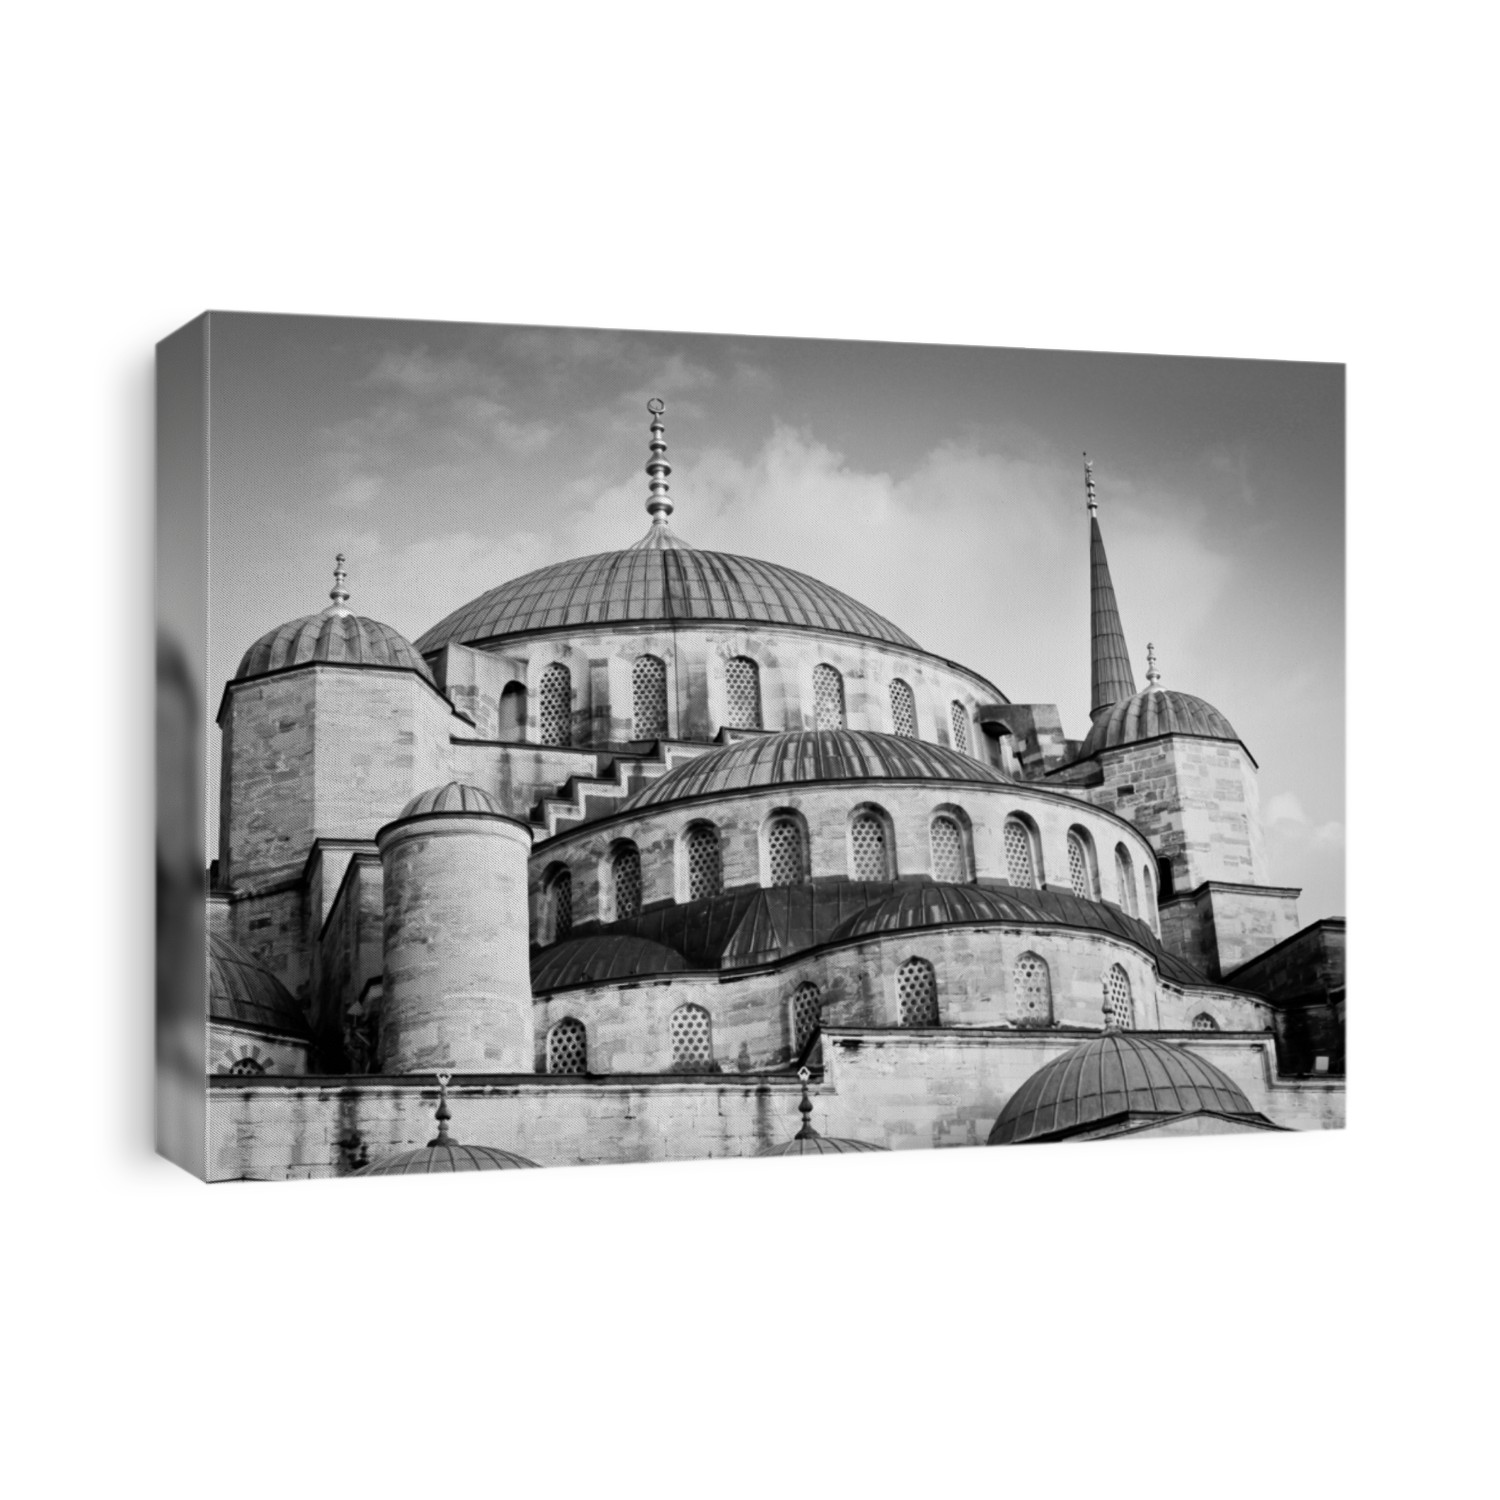 Sultan Ahmed Mosque or Blue Mosque in Istanbul in black and white 